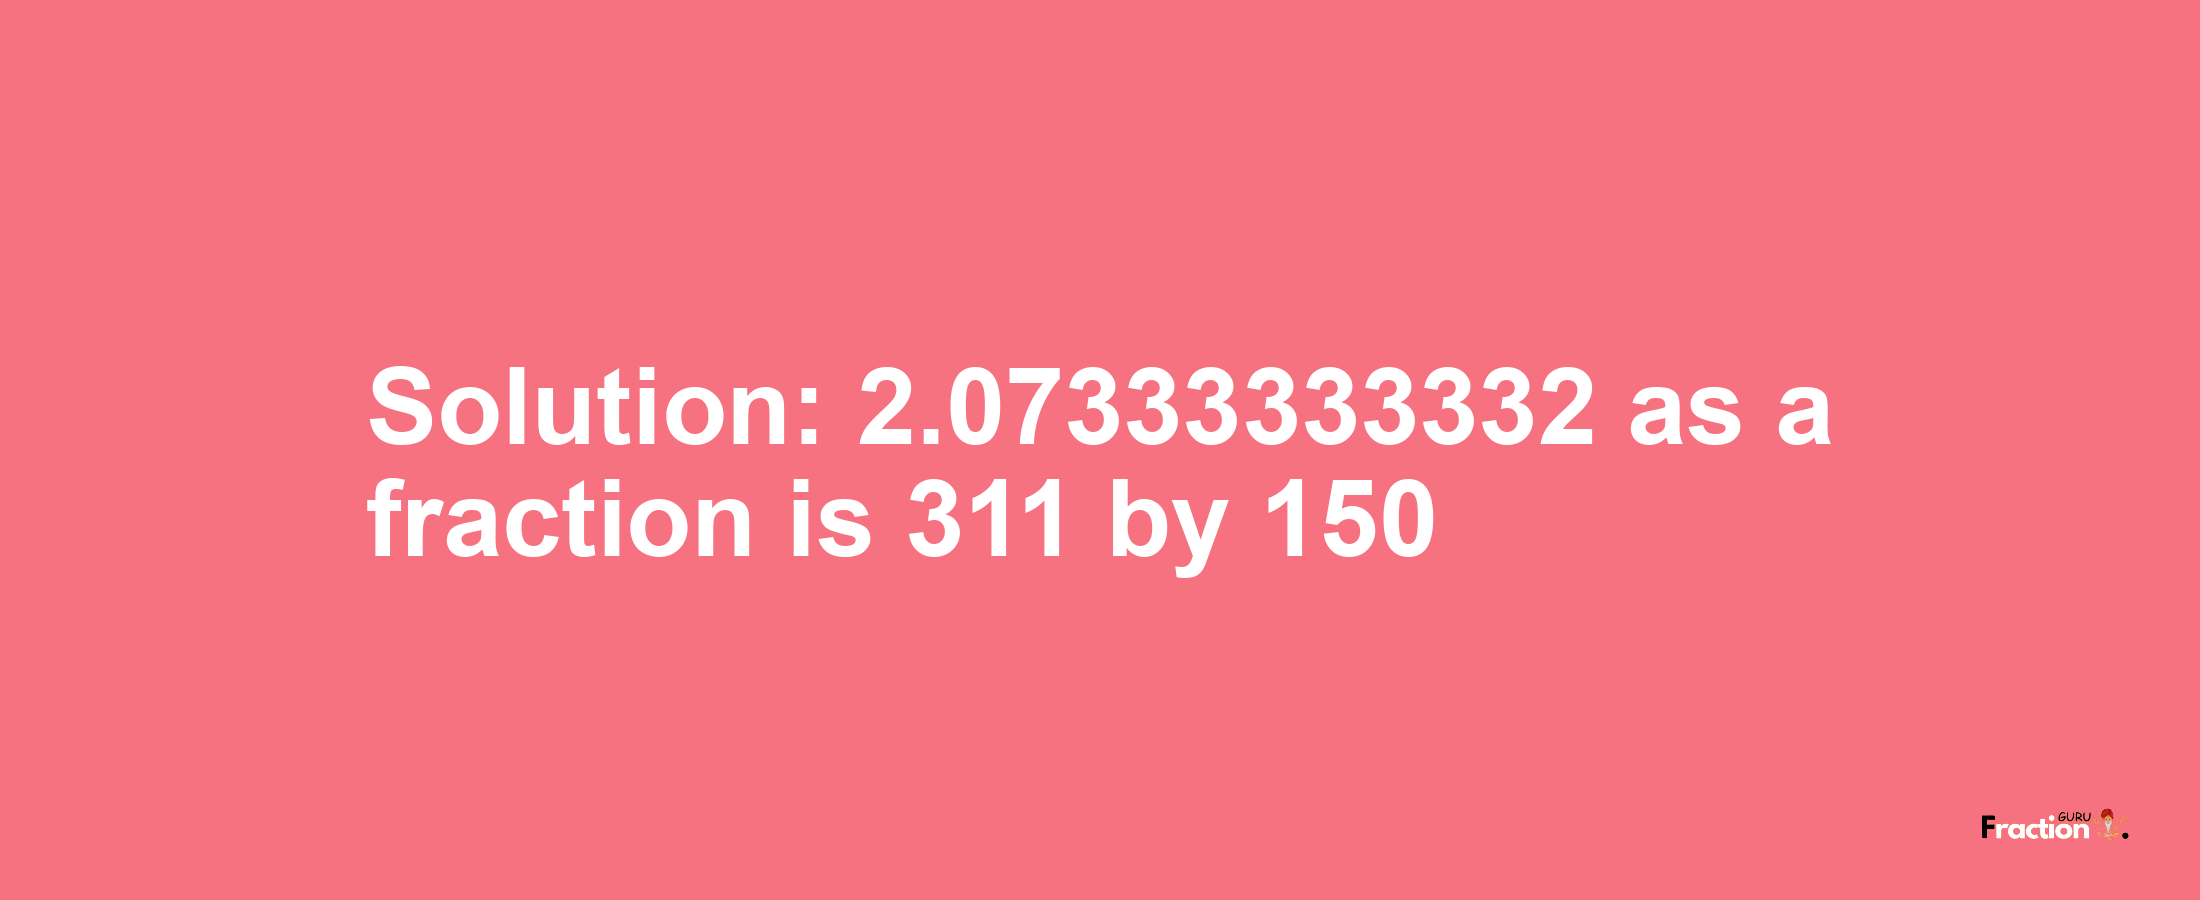 Solution:2.07333333332 as a fraction is 311/150